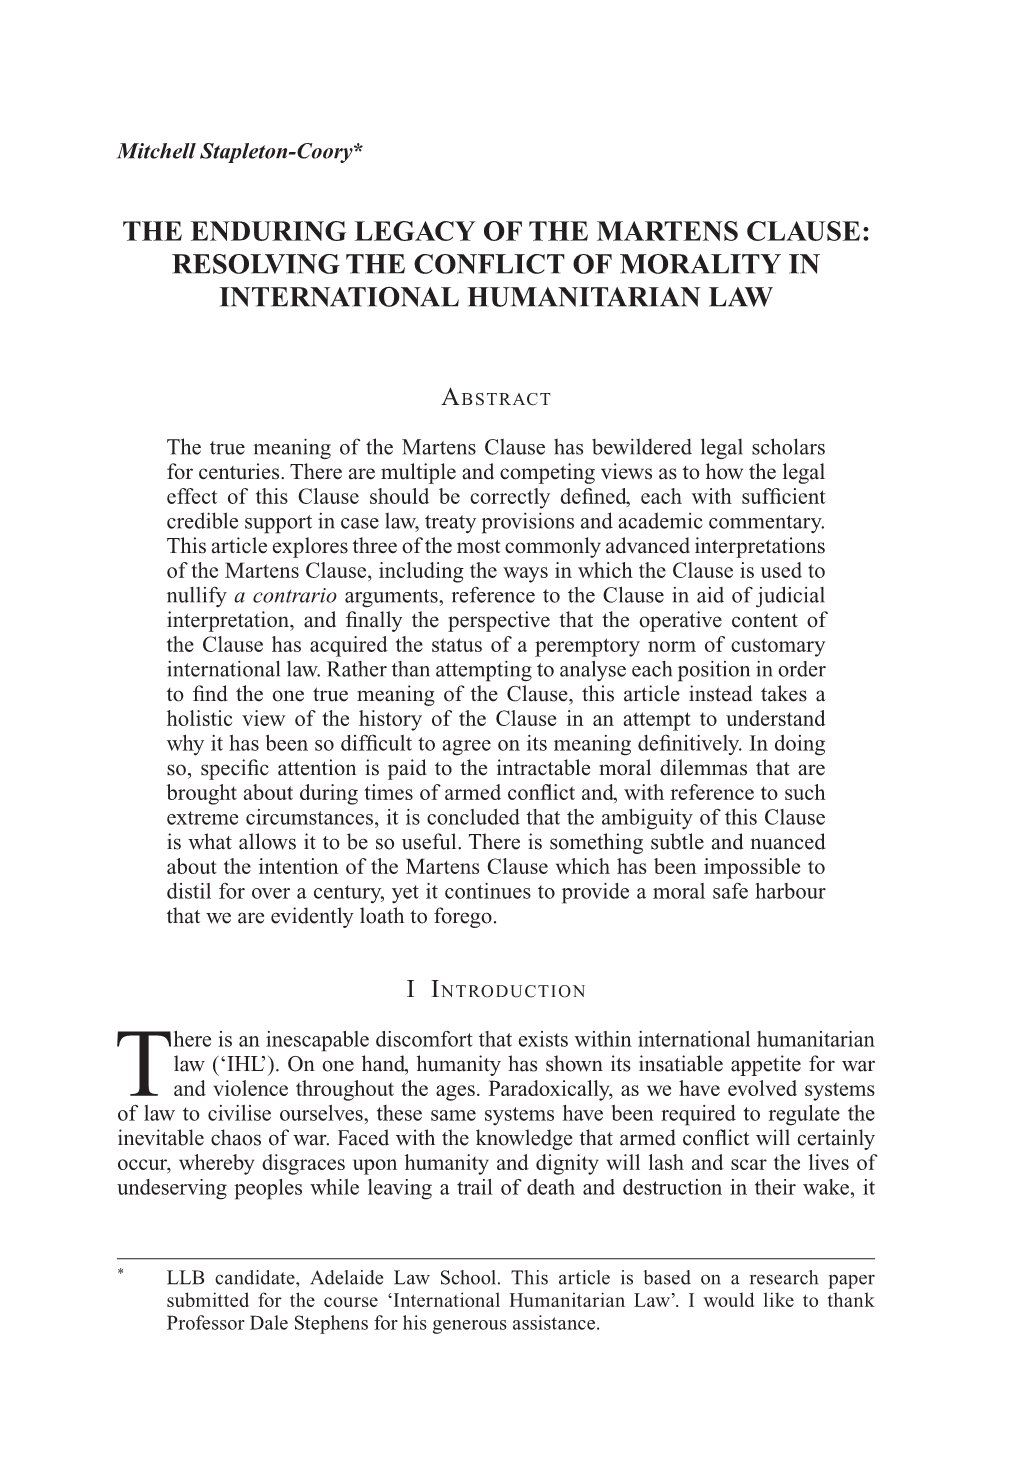 The Enduring Legacy of the Martens Clause: Resolving the Conflict of Morality in International Humanitarian Law